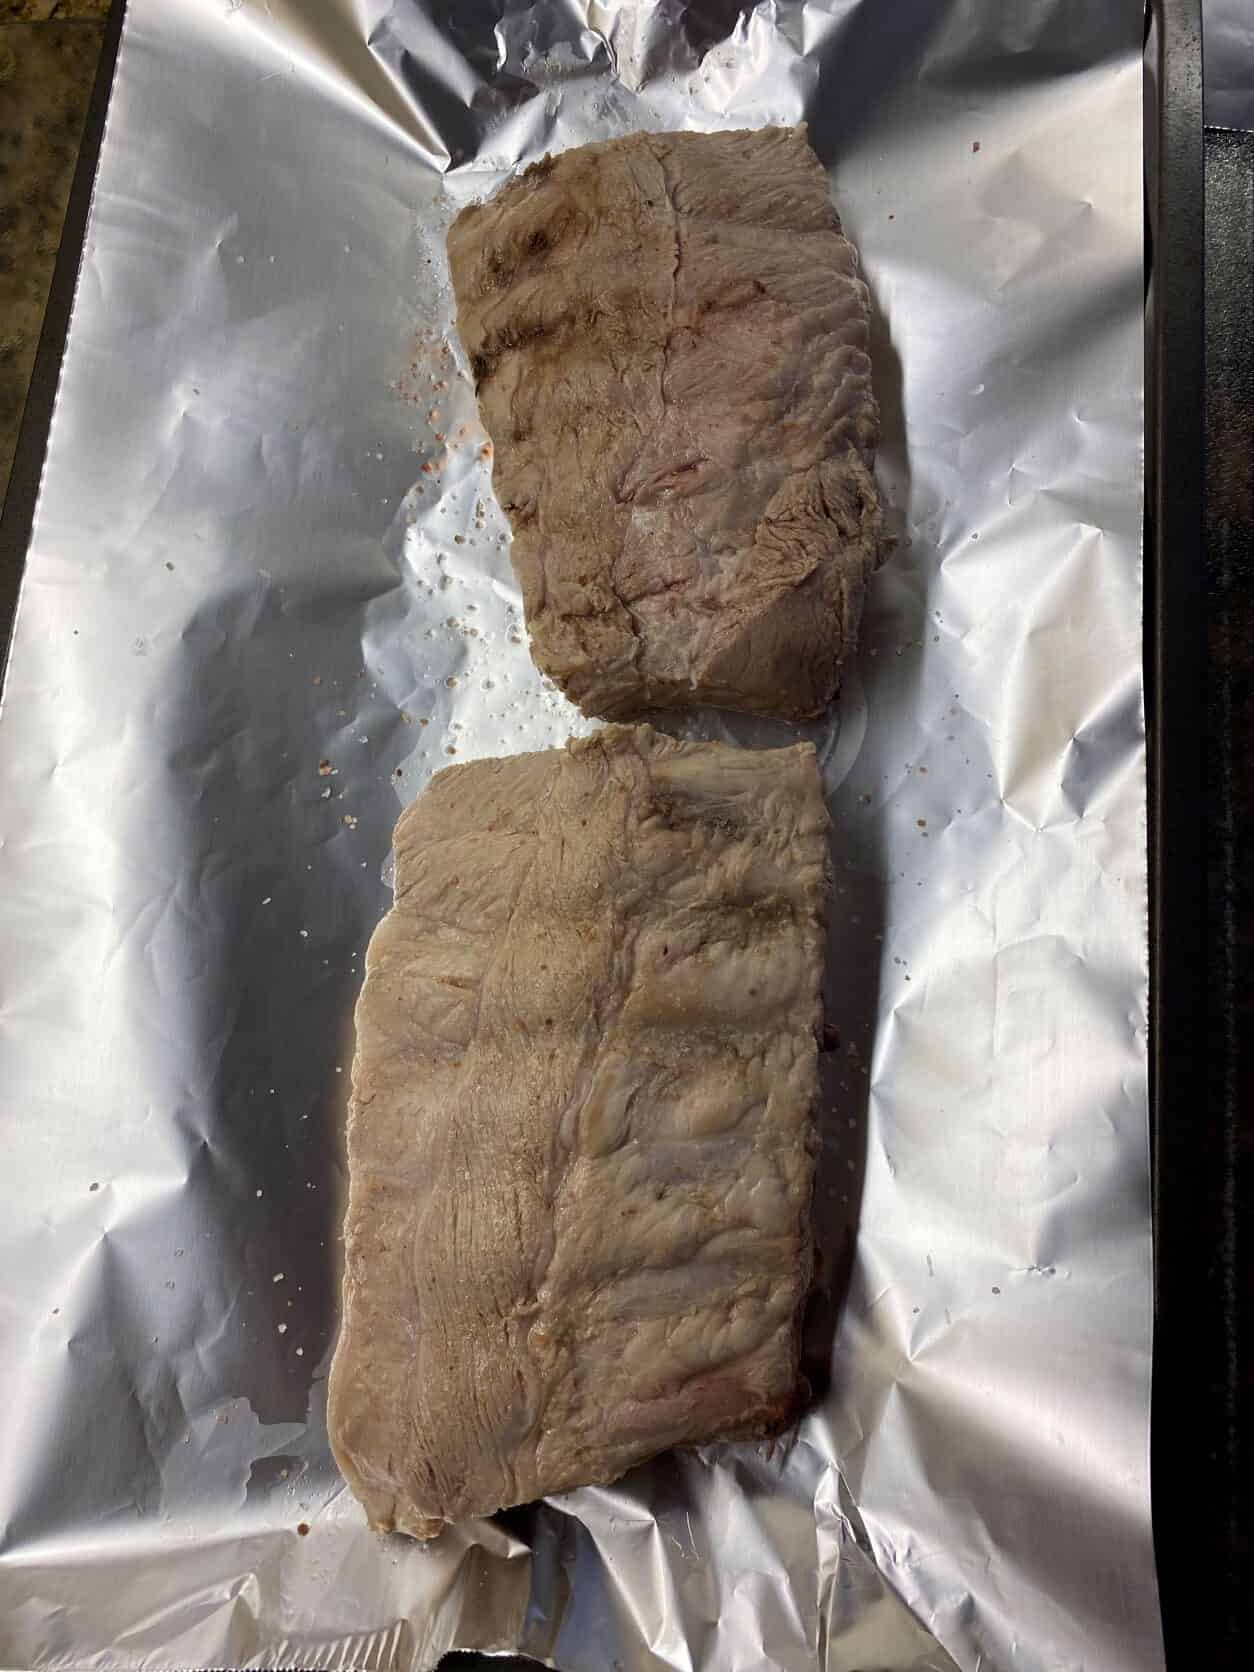 blanched ribs on a baking sheet lined with foil